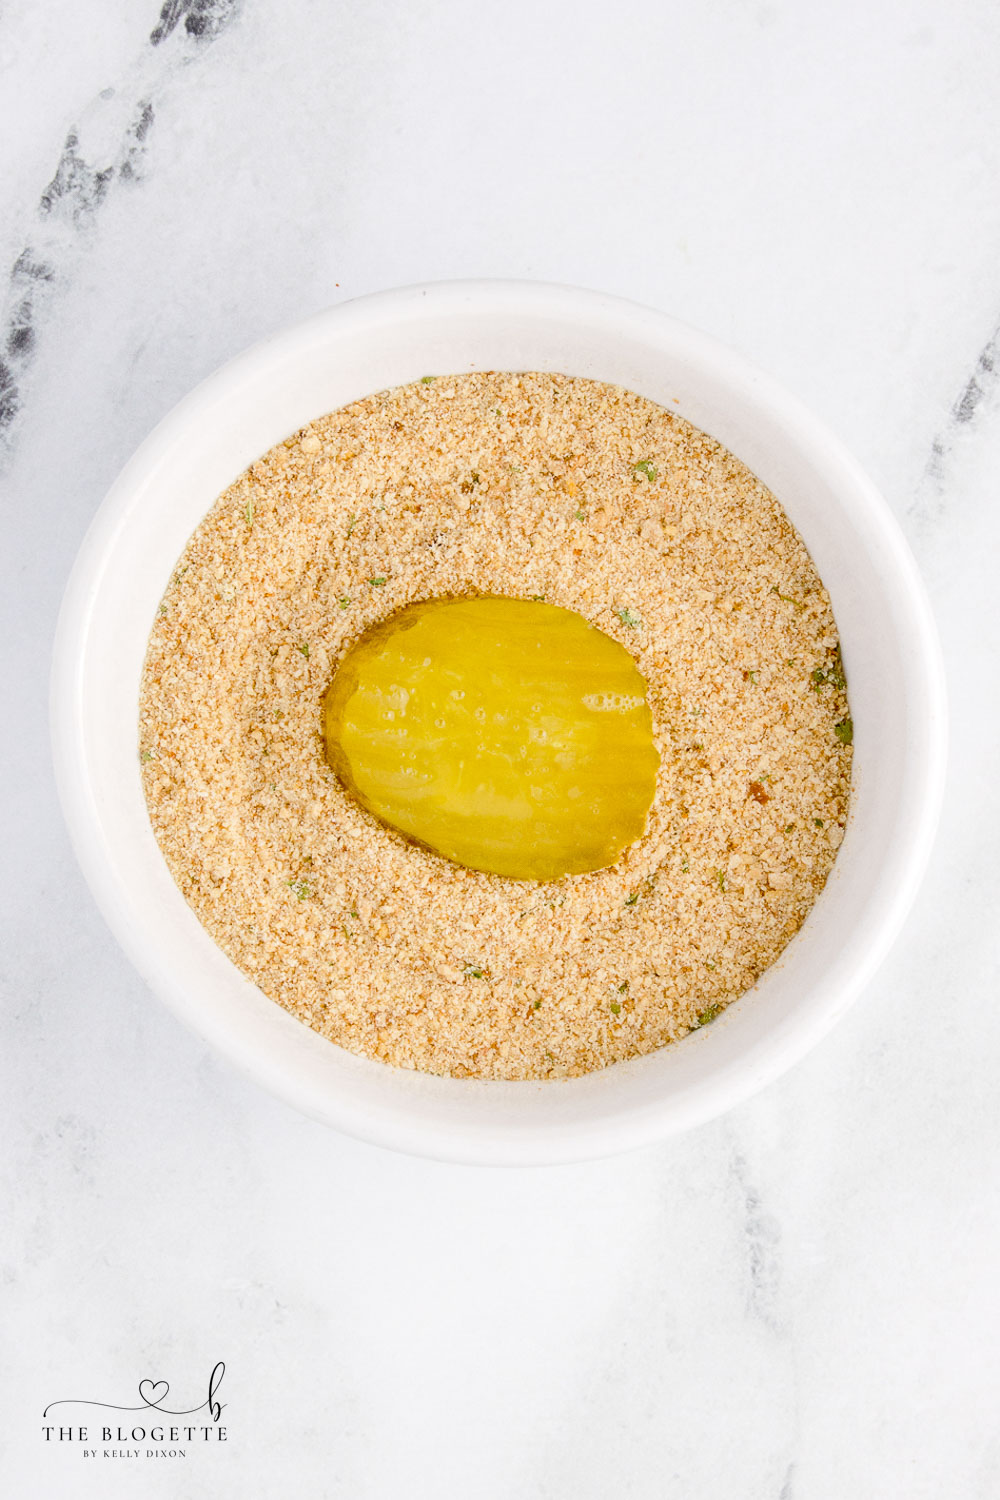 Pickle chip in breadcrumbs